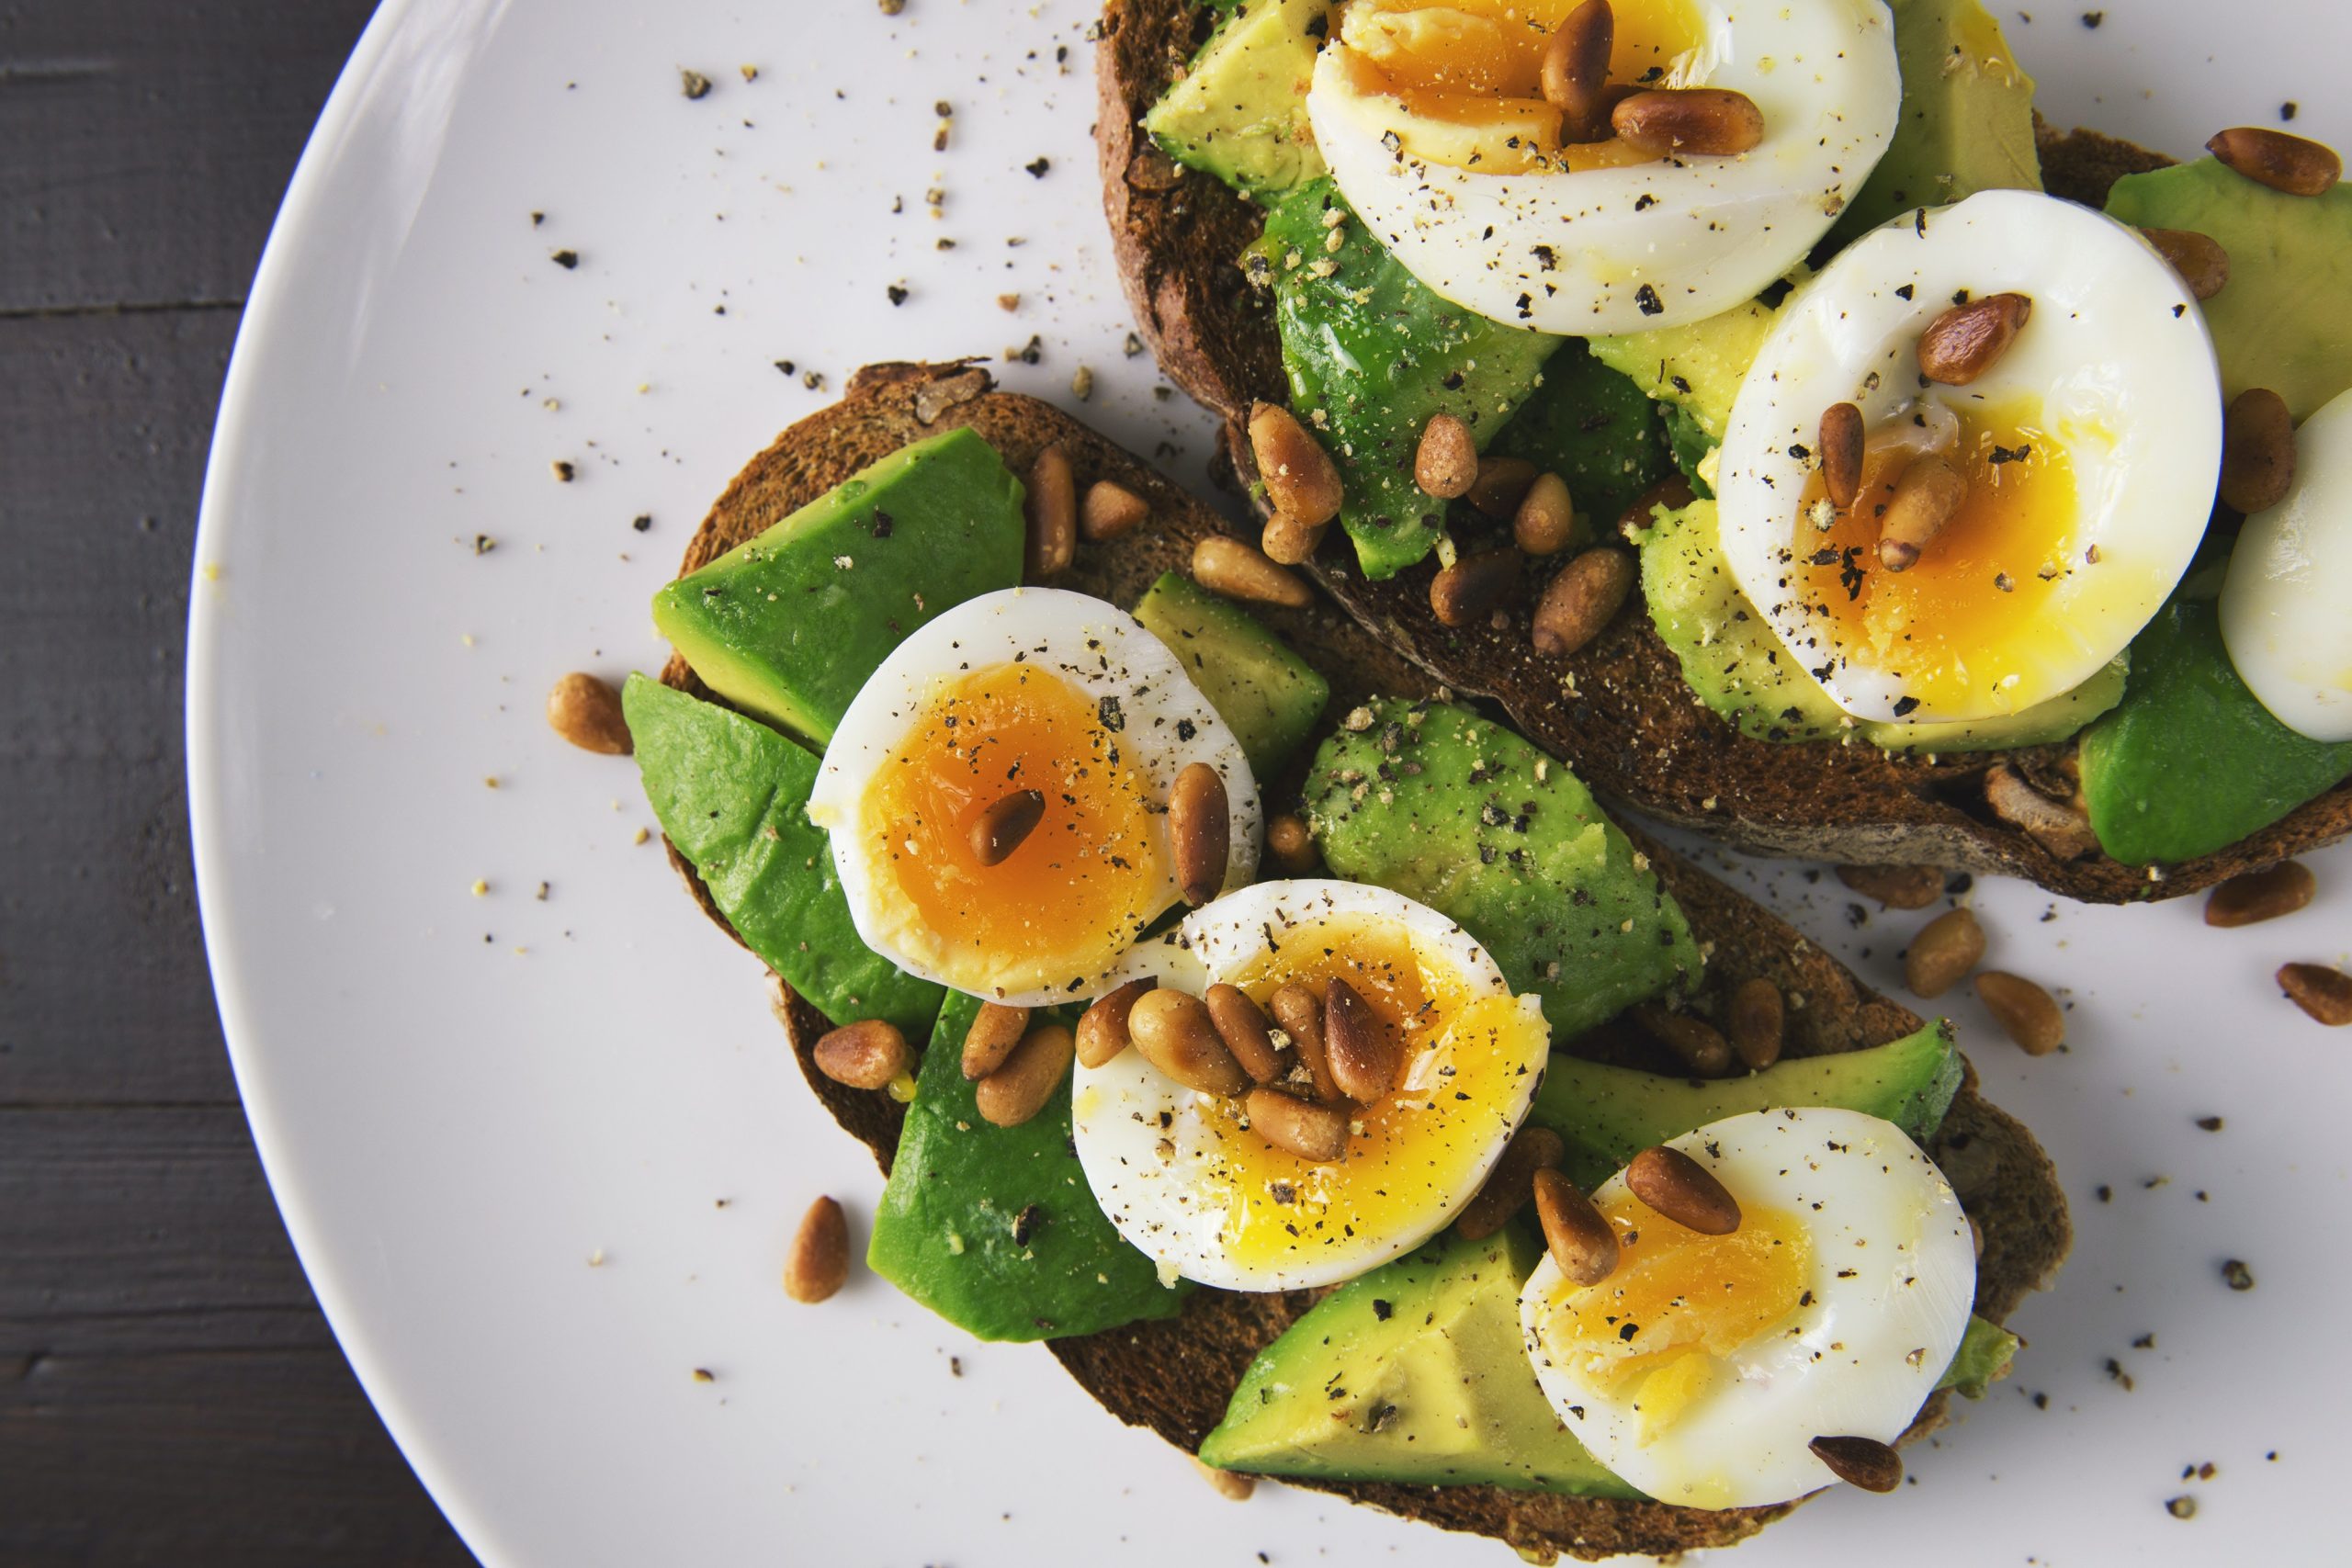 A-photo-of-a-person-eating-a-healthy-breakfast-such-as-eggs-avocado-and-nuts-